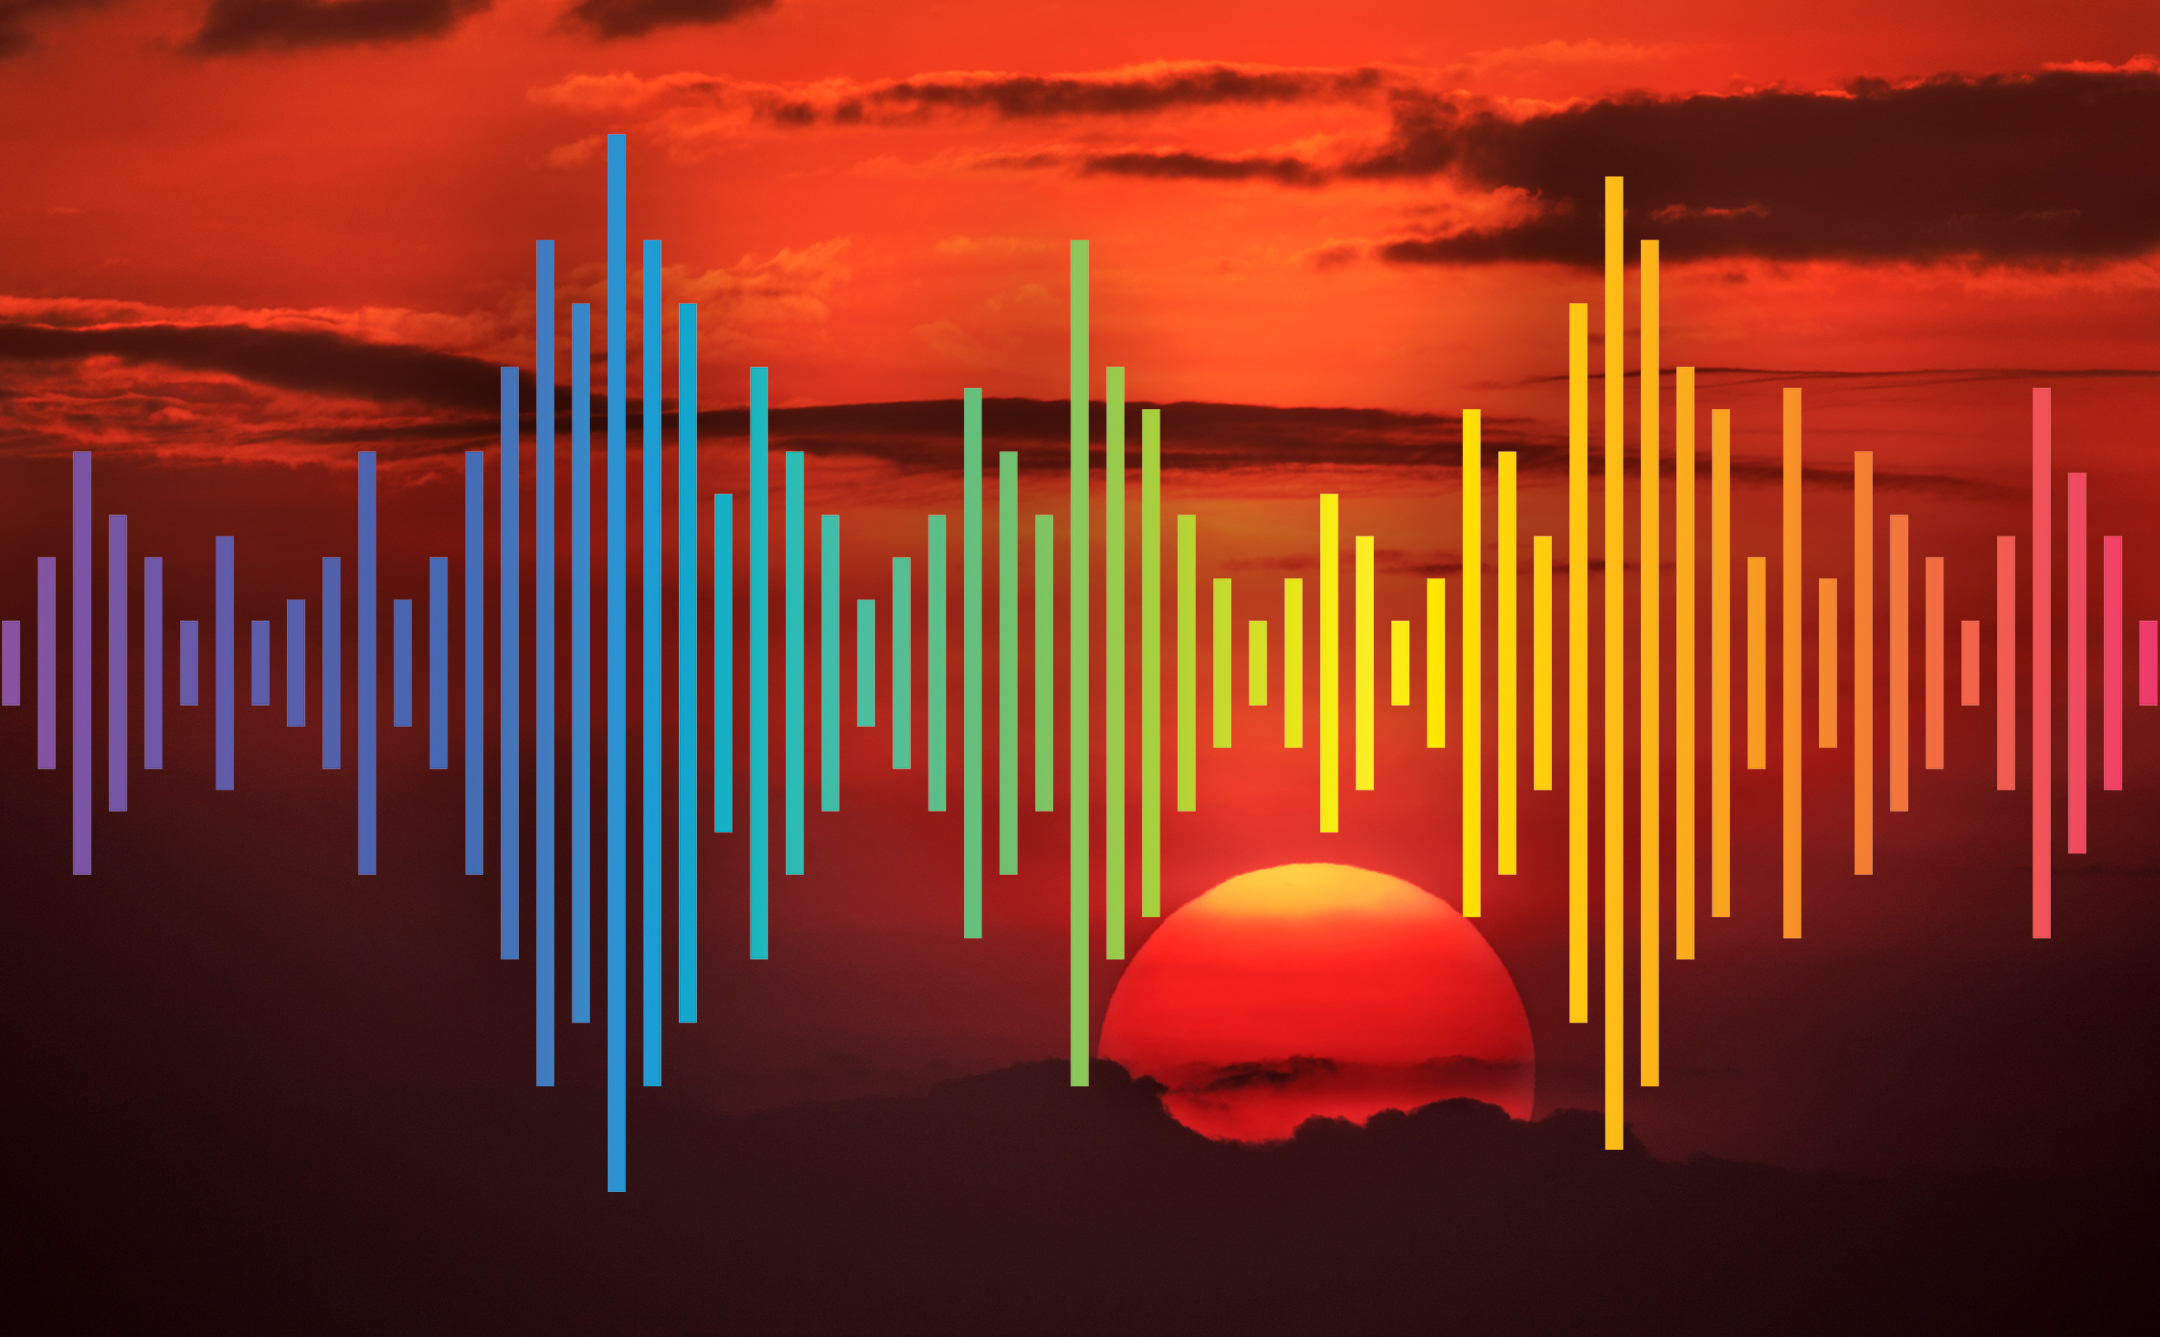 Image of a sunset with an illustration of sound waves layered on top